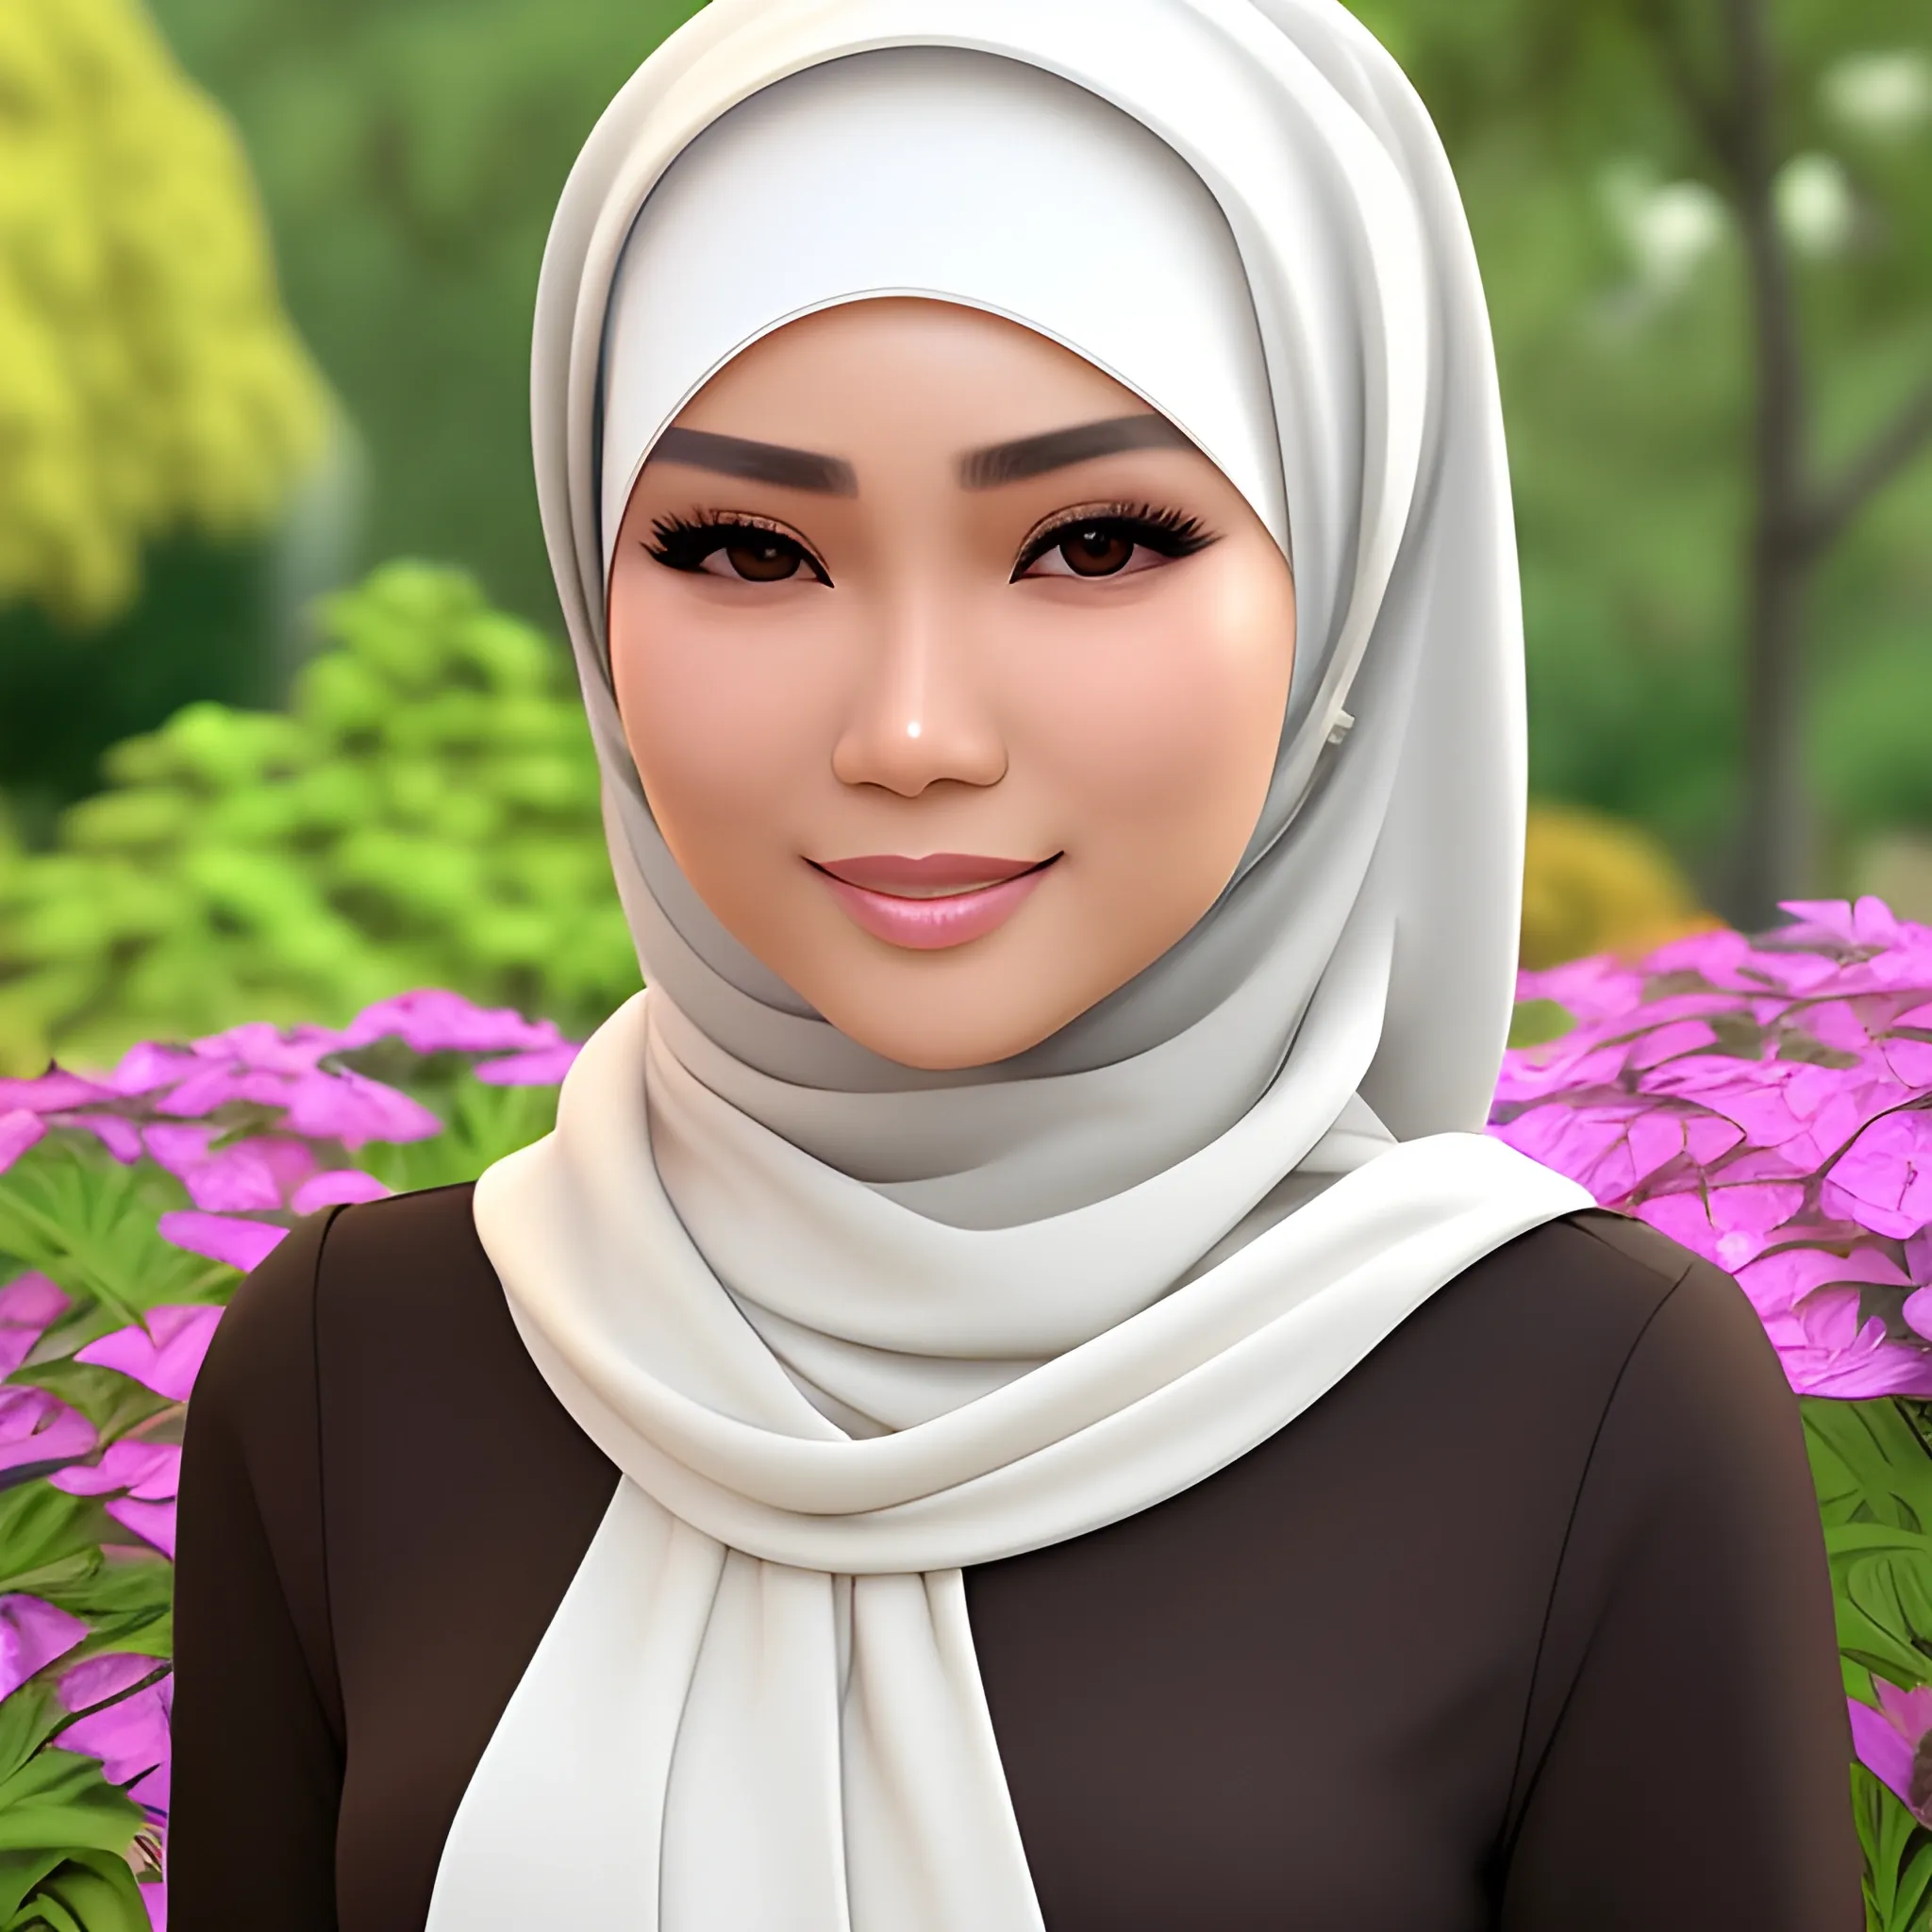 pretty women indonesian, sporty, elegant, happy, face detail, sharp nose, black eyes, wearing a brown hijab, white blouse, casual, in the garden, her eyes looking at camera, 4k, 3D